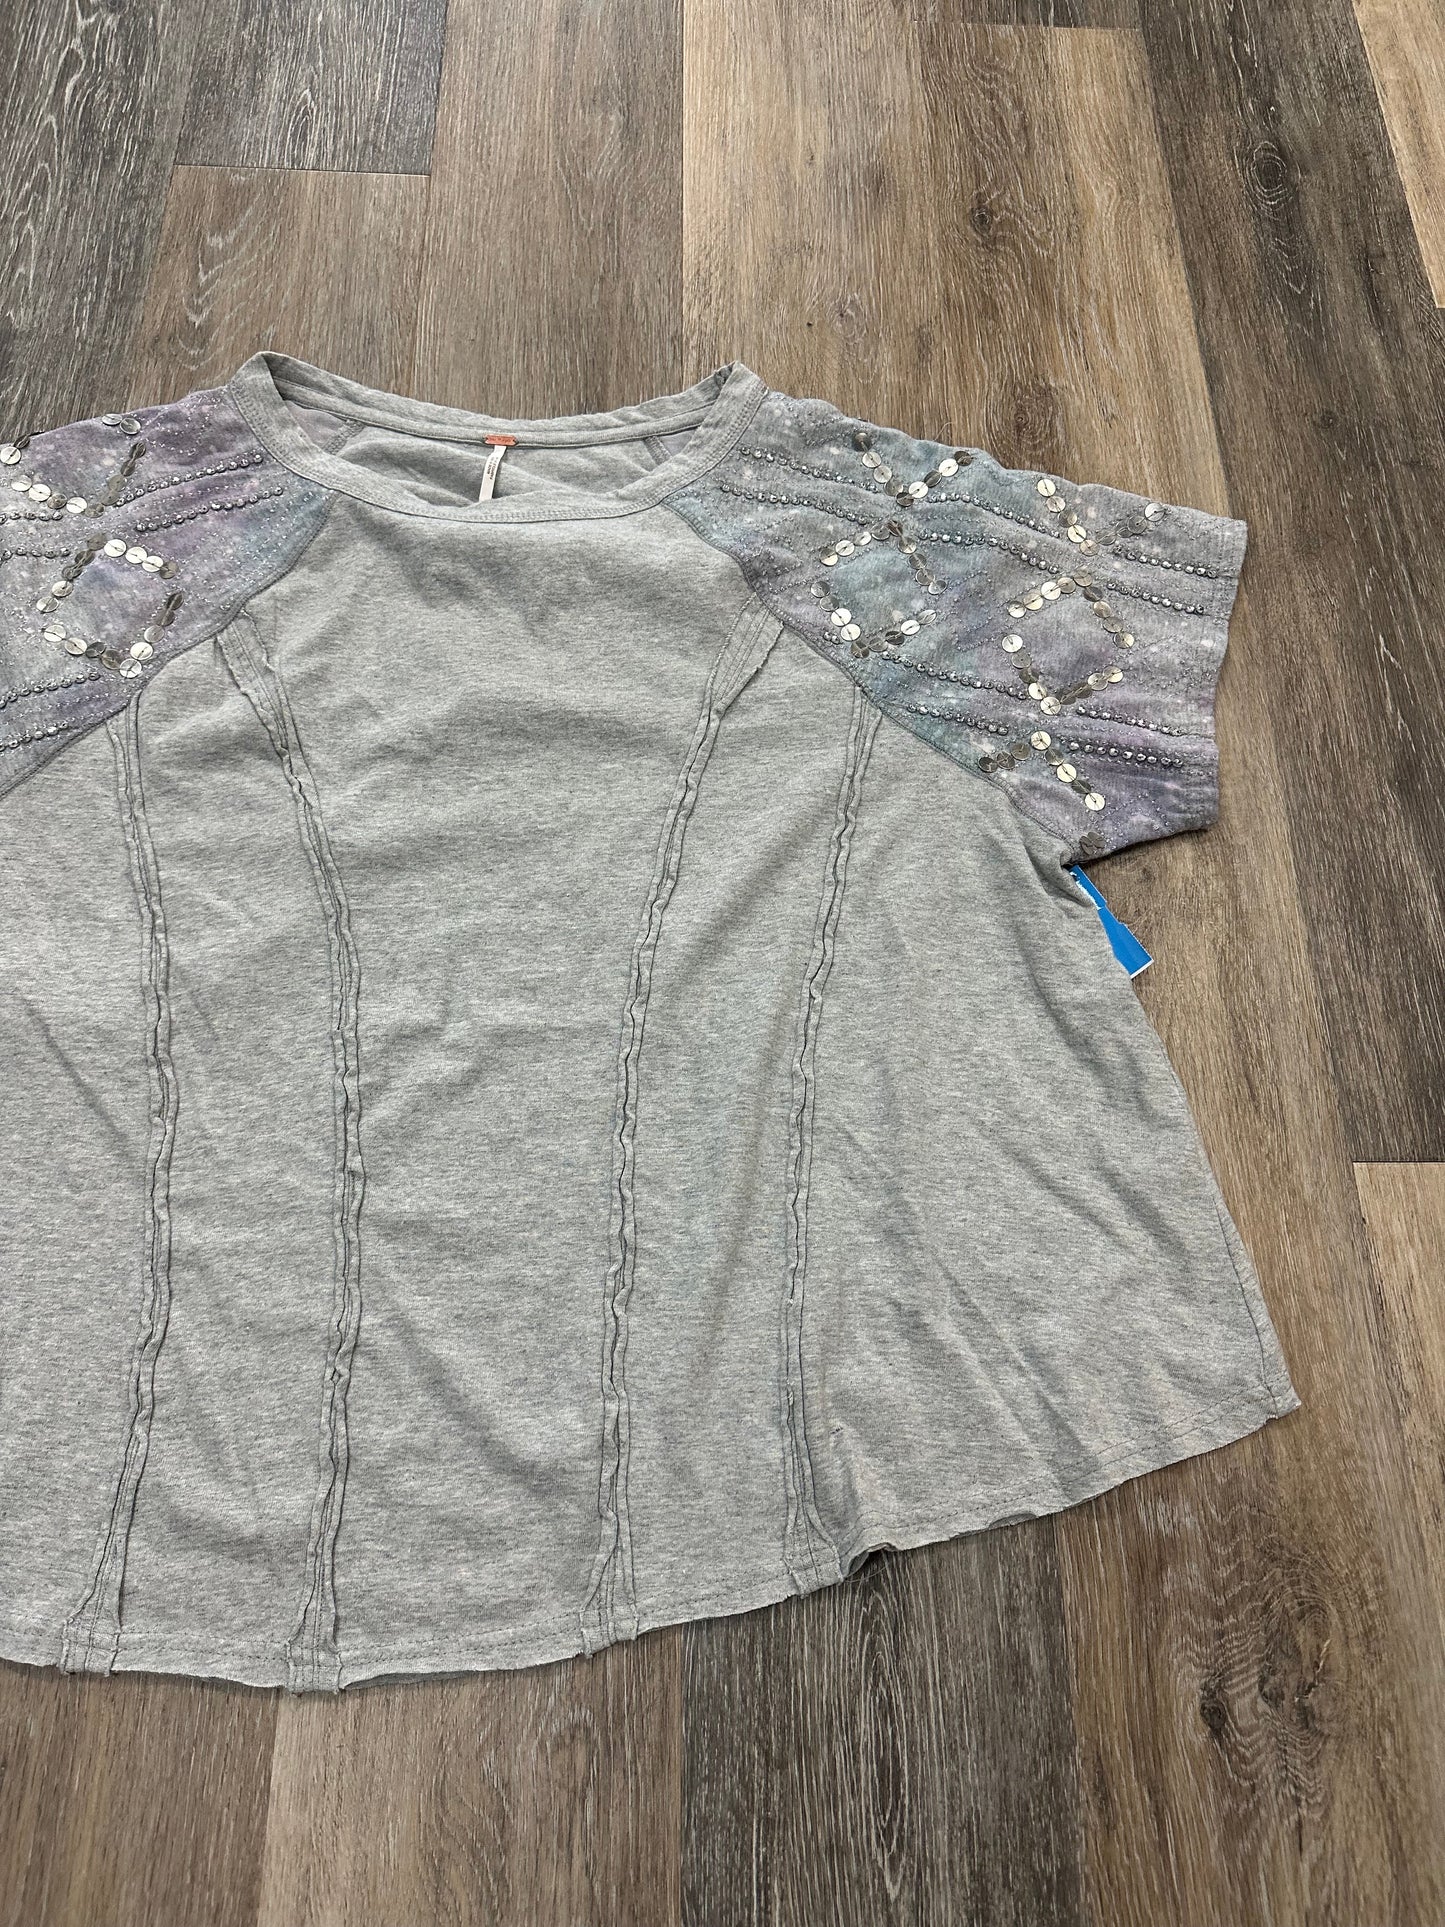 Grey Top Short Sleeve Free People, Size S